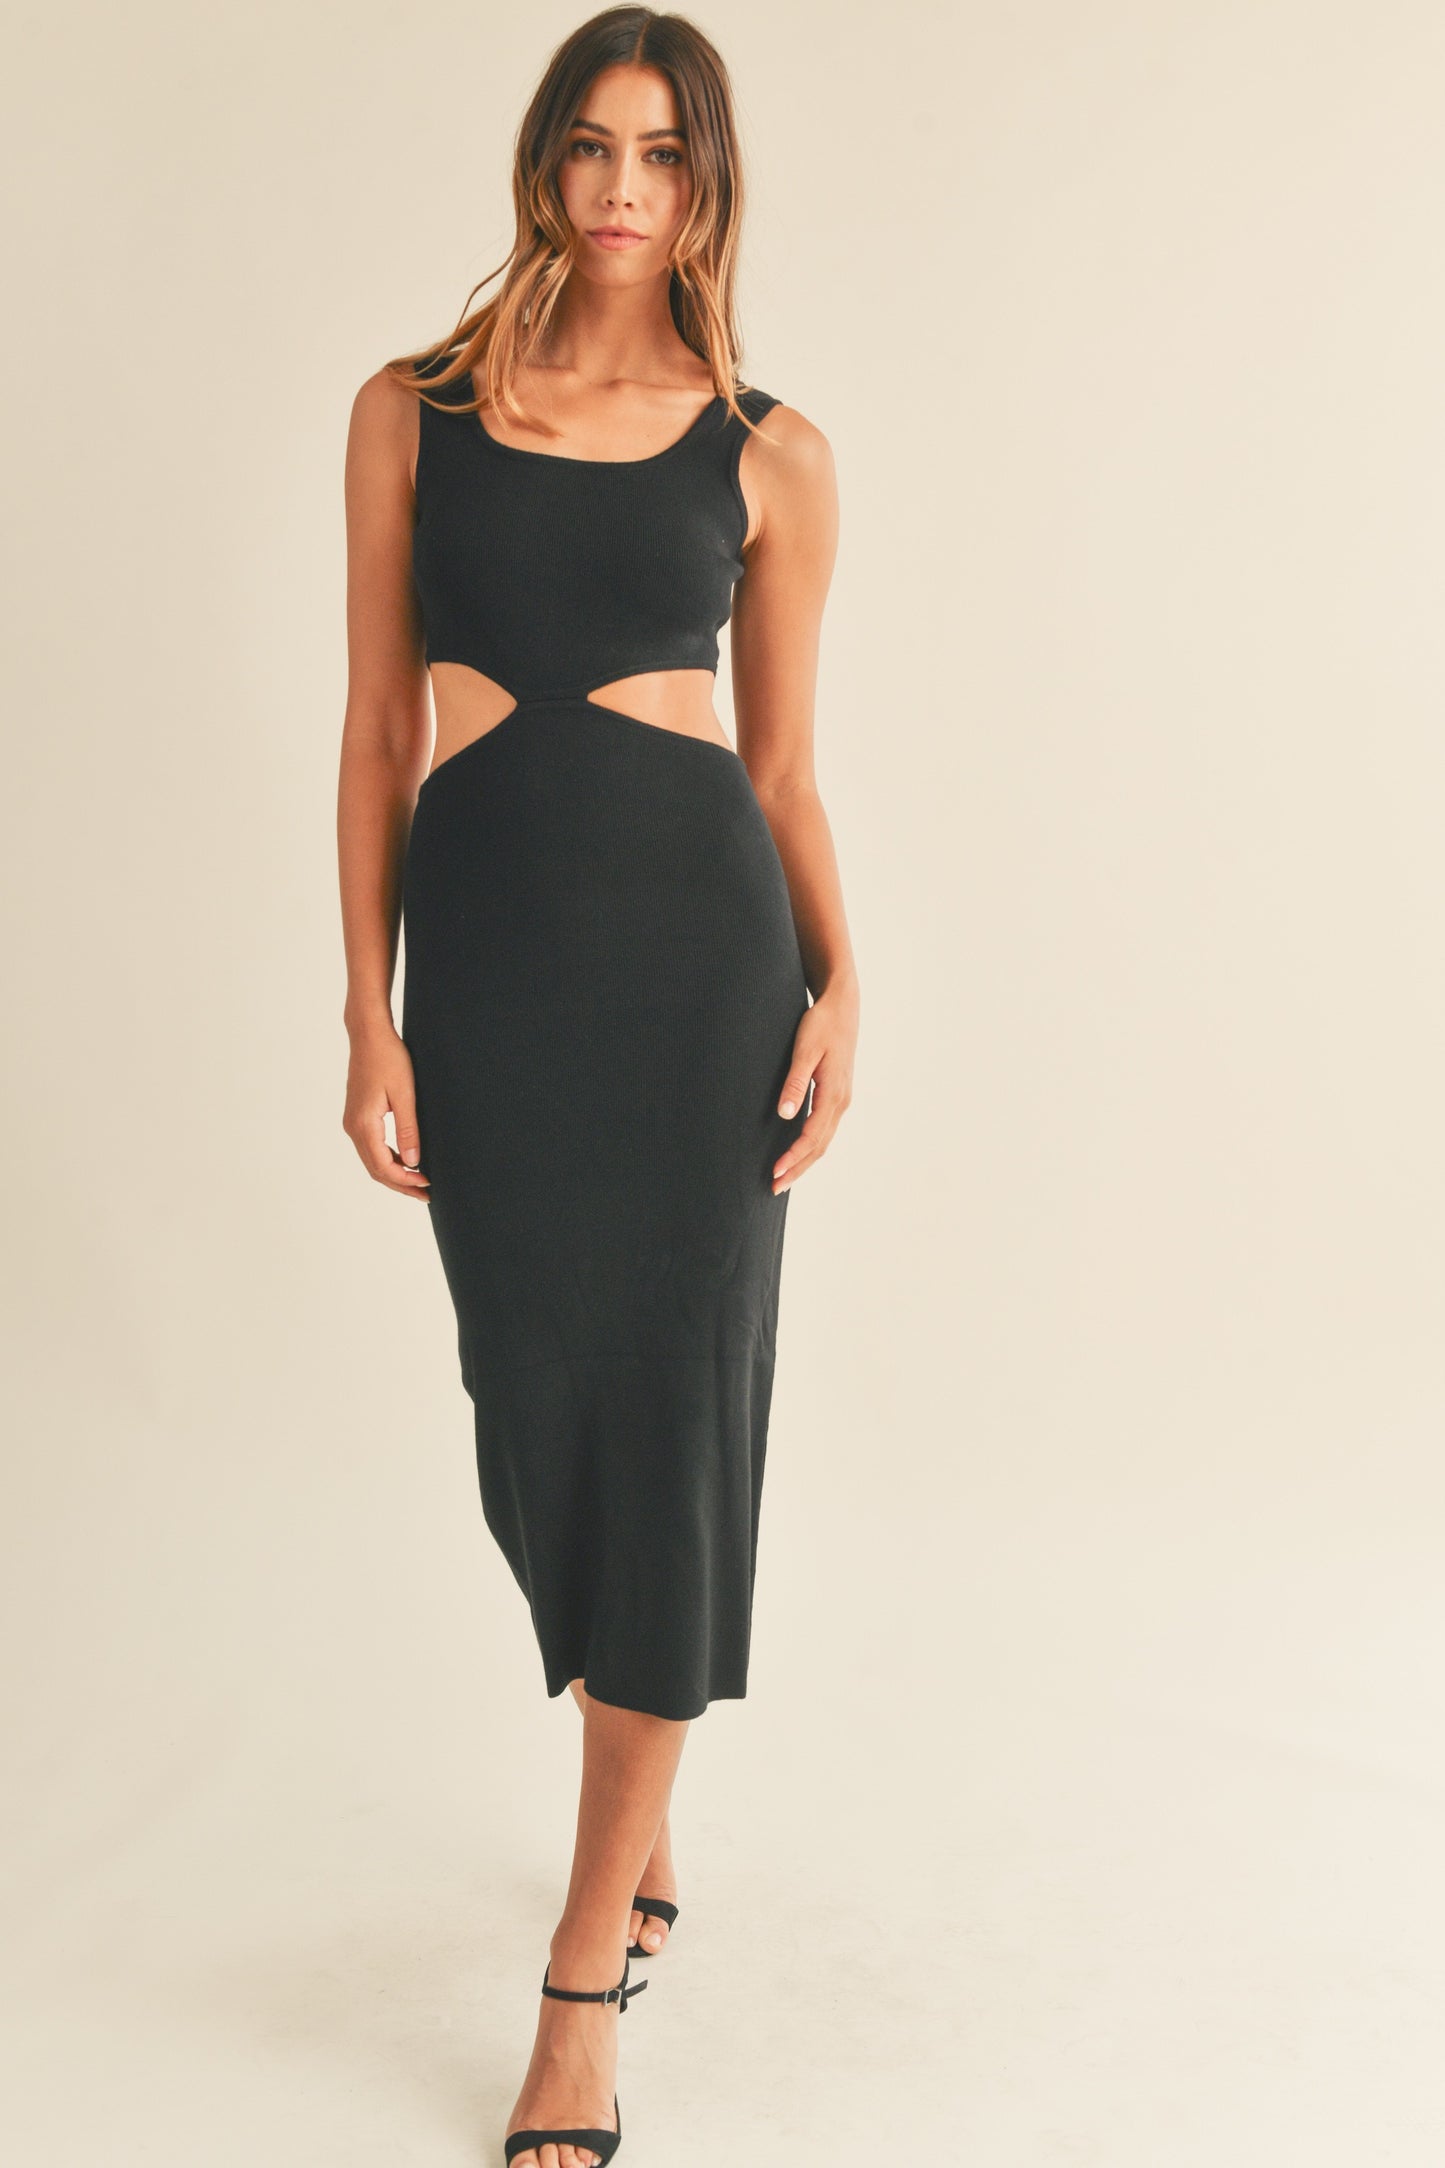 Knit sleeveless midi dress in black features side cut outs and a tank-style top. Front view.